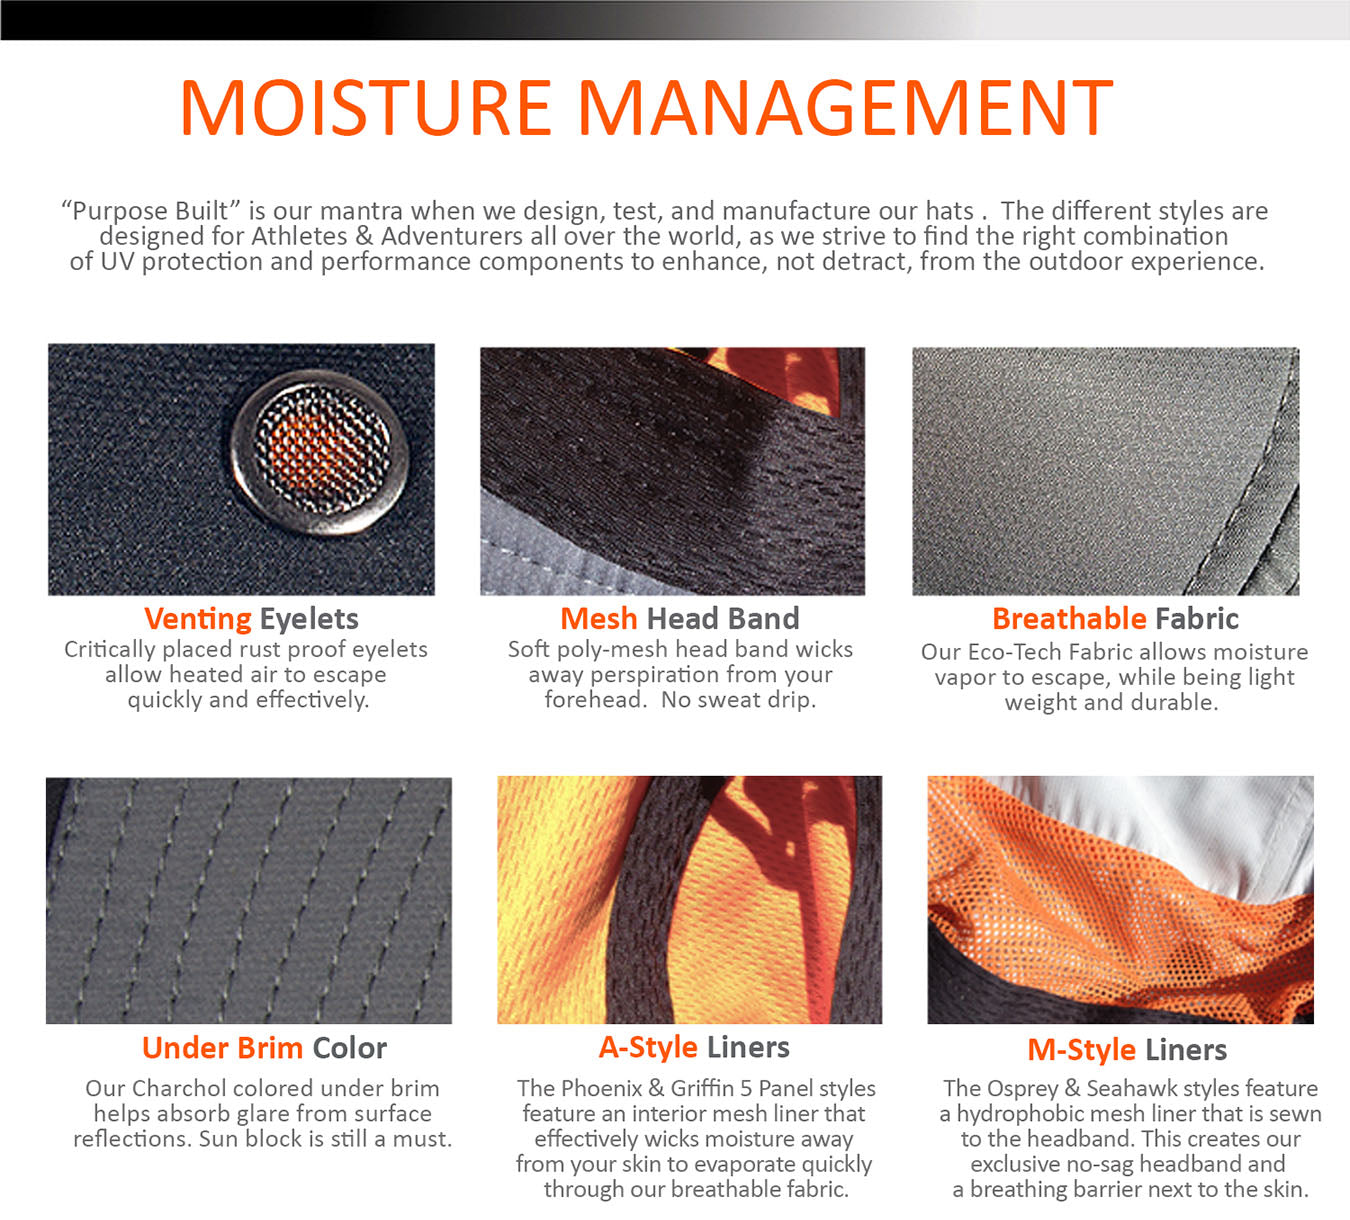 Sun Hat Moisture Management-Shelta Sun Hat Moisture Management System - Interior mesh liner effectively wick moisture away from  your skin to evaporate quickly through our breathable fabric.  The headband then wicks away any remaining  perspiration from your forehead.
Breathable Sun Hat Fabric -   Extremely breathable, which allows moisture and heat to escape from the inside out. DWR (water repellent) rating which repels moisture, dries quicker and floats better. Environment friendly recycled polyester
Shelta Sun Hat Moisture Management System - Interior mesh liner effectively wick moisture away from  your skin to evaporate quickly through our breathable fabric.  The headband then wicks away any remaining  perspiration from your forehead.
Shelta Sun Hat Venting - Critically placed eyelets allow heated air to escape quickly and effectively. A simple, but critical part of keeping your head cooler. 
Shelta Sun Hat Head Band - The headband is sewn to the mesh liner, which keeps it from sagging when it gets soaking wet.  This makes for a no hassle experience when putting your hat back on in the water.
Shelta Sun Hat Stash Pocket - Each style features a pocket to store your convertible cord system in when not in use.  Also a great place to stash small items like keys, credit card or drivers license
Shelta One hand sun hat cinch -  Having to use both hands to tighten your hat is not an option for stand up paddling.  Our one handed cinch is critical for that quick on the fly adjustment
Water safe sun hat - Dual layers of closed-cell brim foam, our plastic winged vision visor and water repellent fabric enables our hats to FLOAT.  Also has an easy to spot orange interior.
Reflective Sun Hat logo
Sun Hat sun protection - Two crown styles and brim widths. Multiple  technical features designed for your specific outdoor performance needs. Sun Hats Designed for fishing, SUP, Stand Up Paddle and athletes and adventures.  
